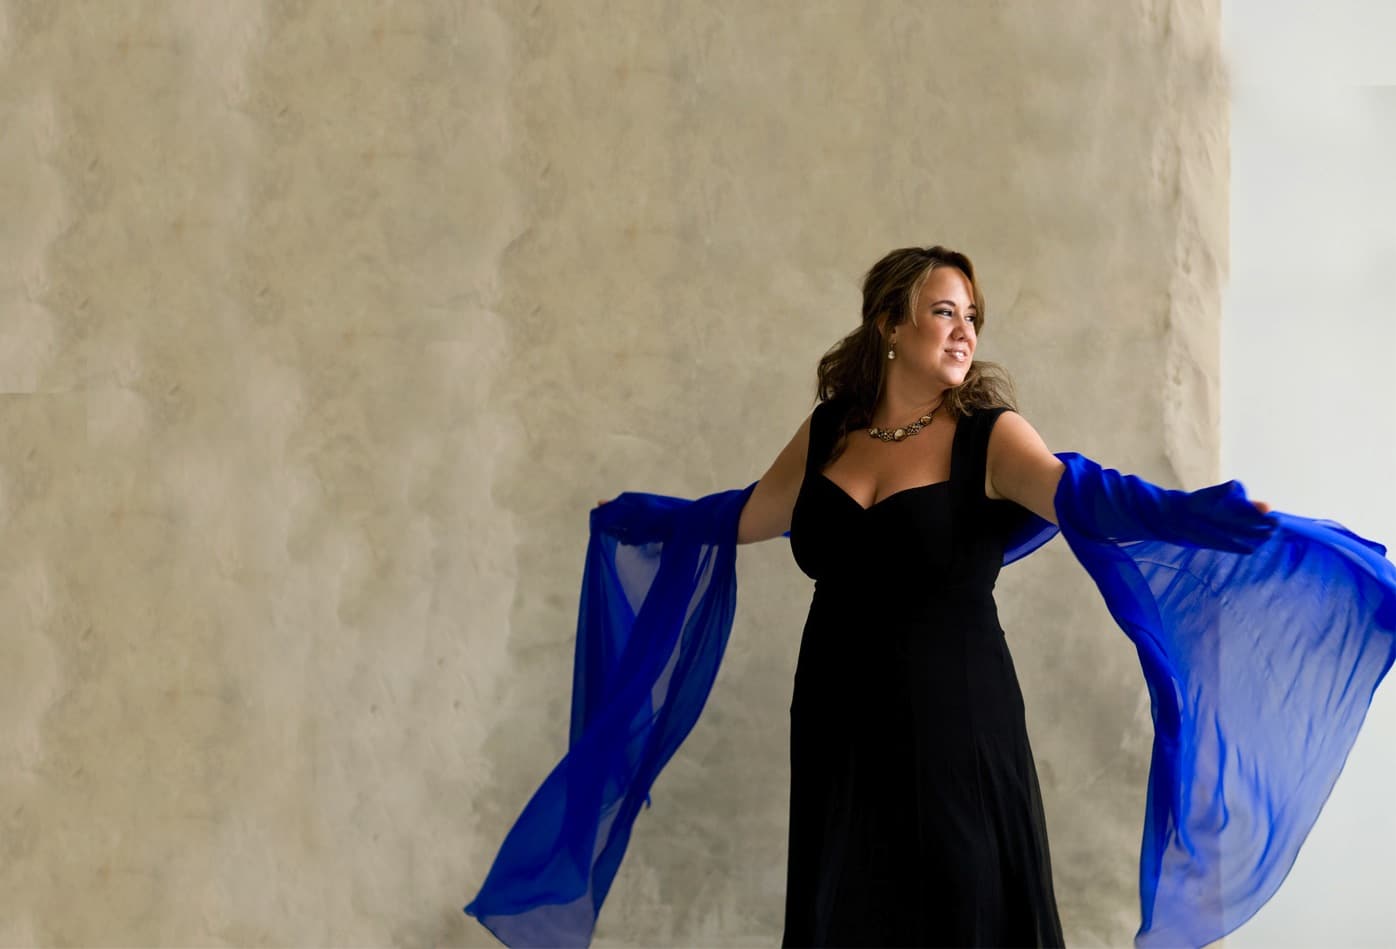 Breaking: Now Yoncheva pulls out of Met’s sick Otello